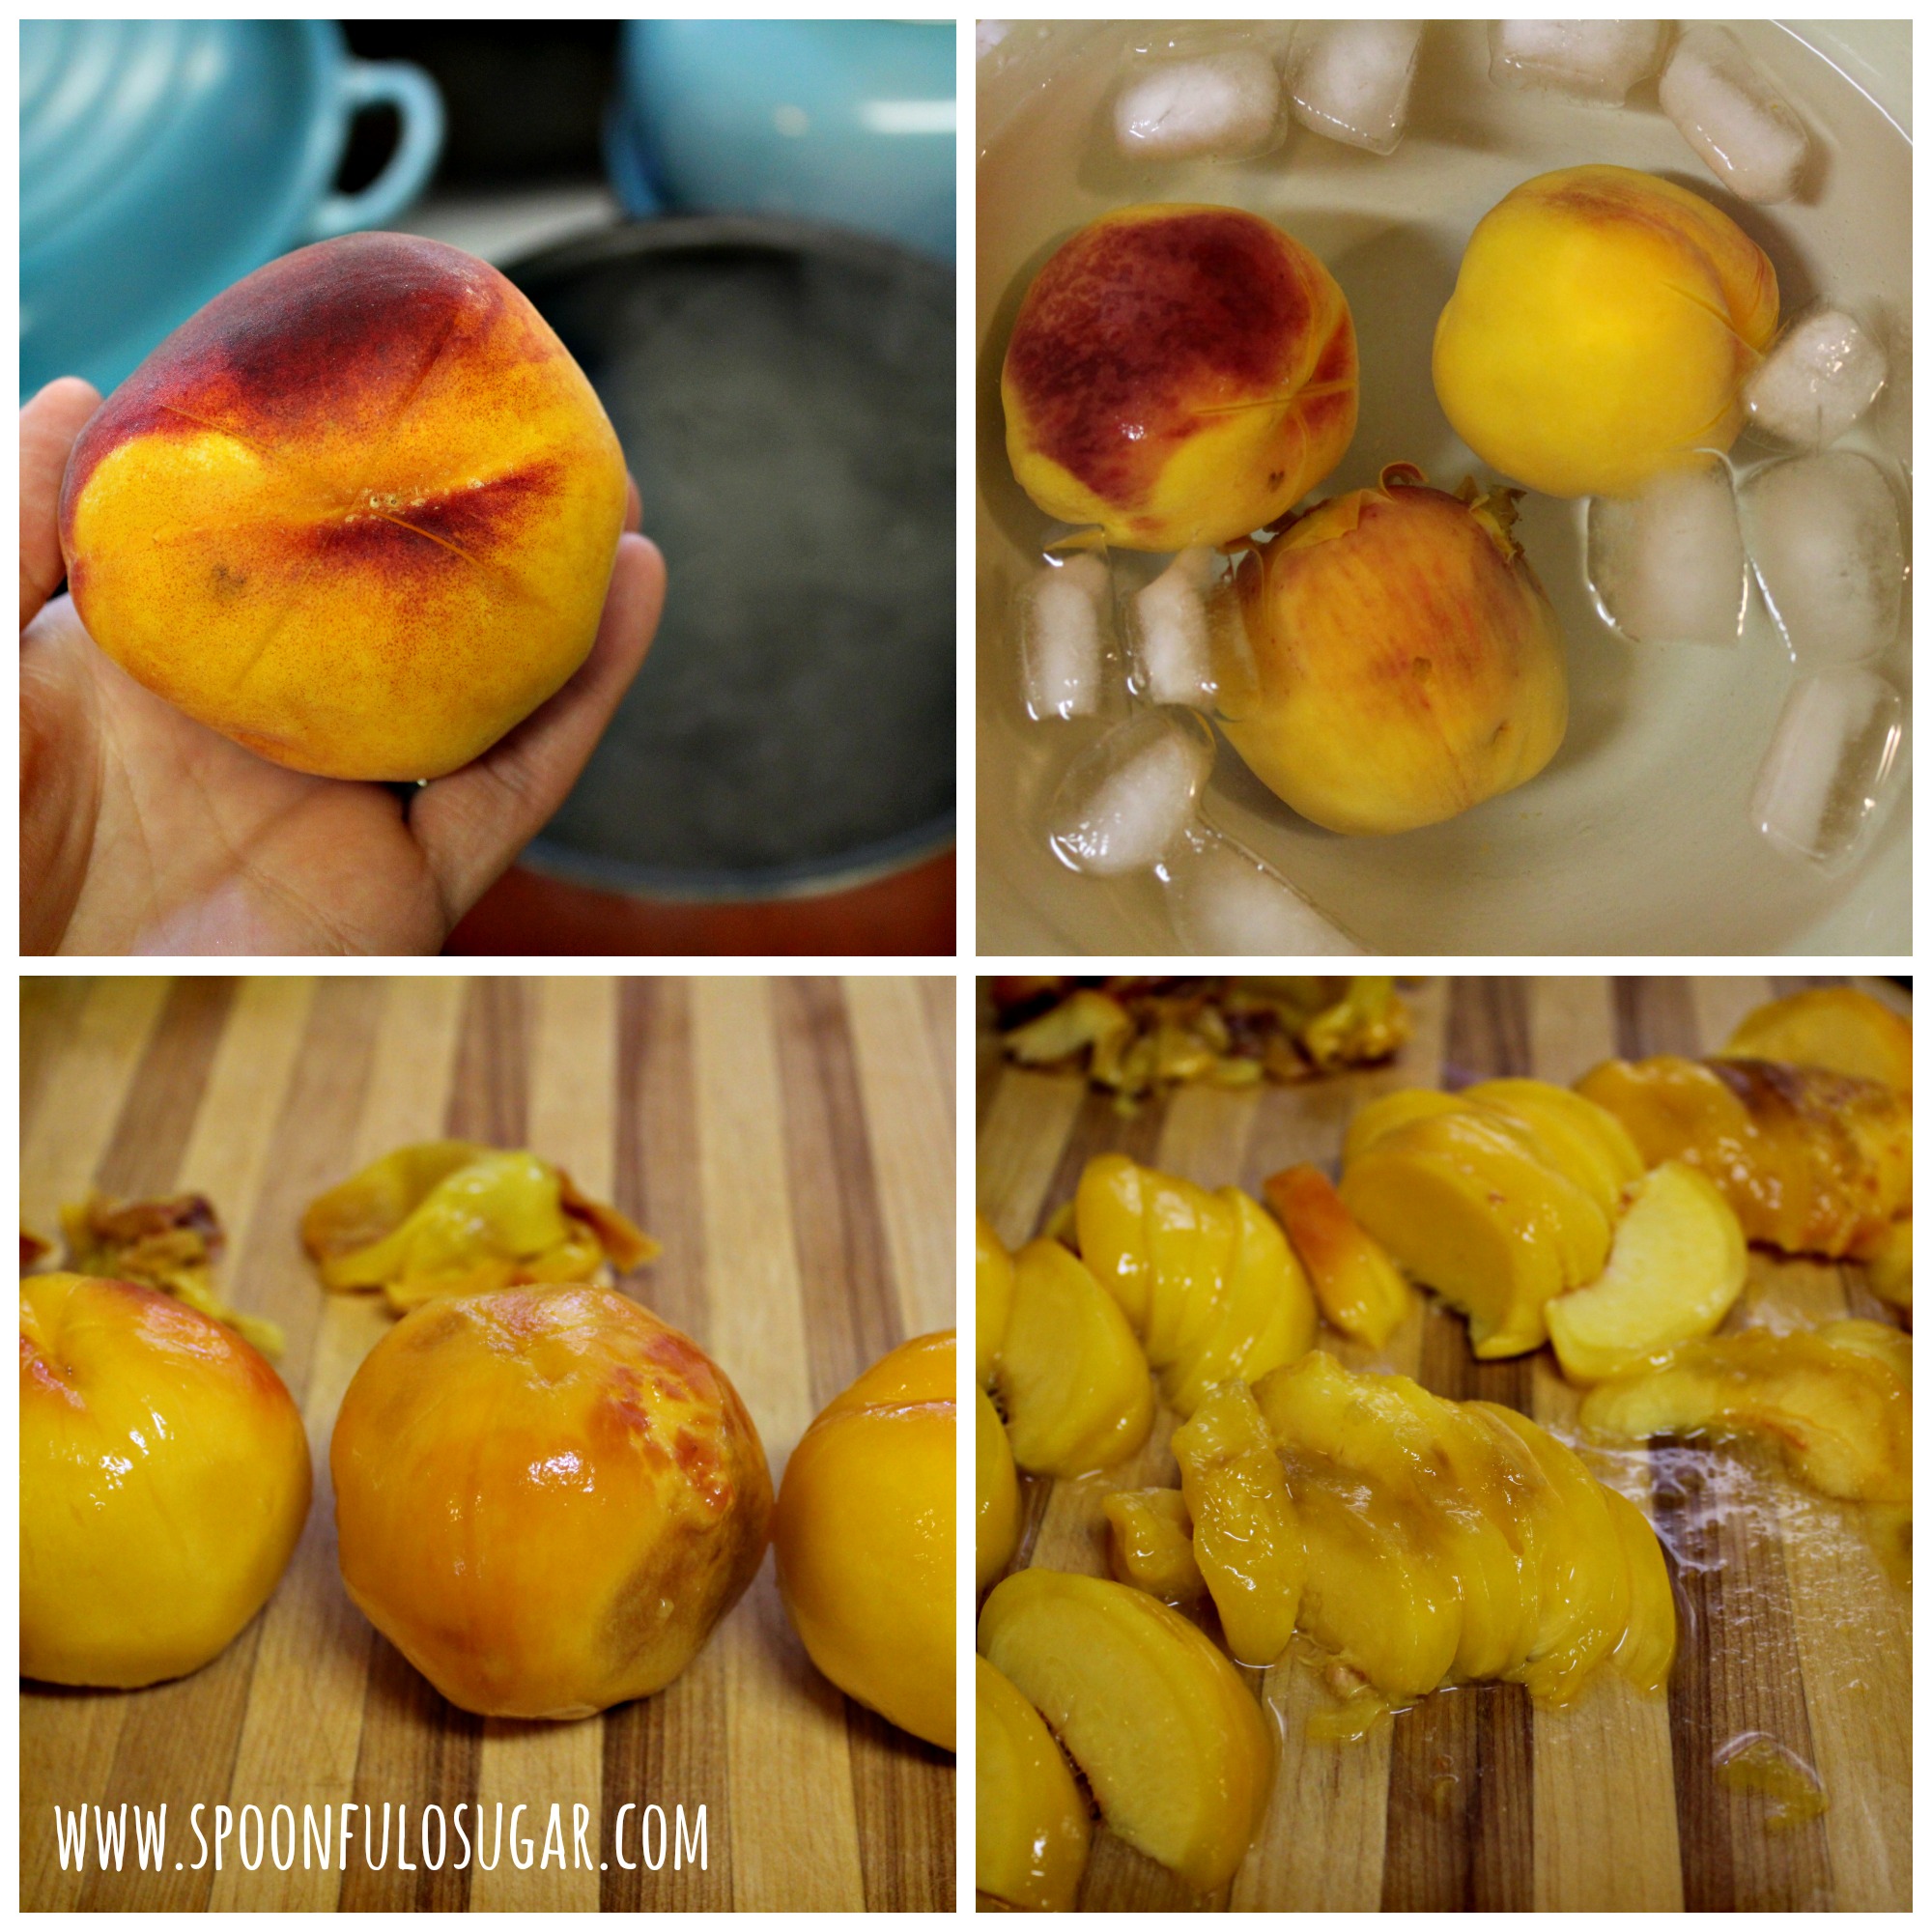 How to peel peaches | Spoonful of Sugar